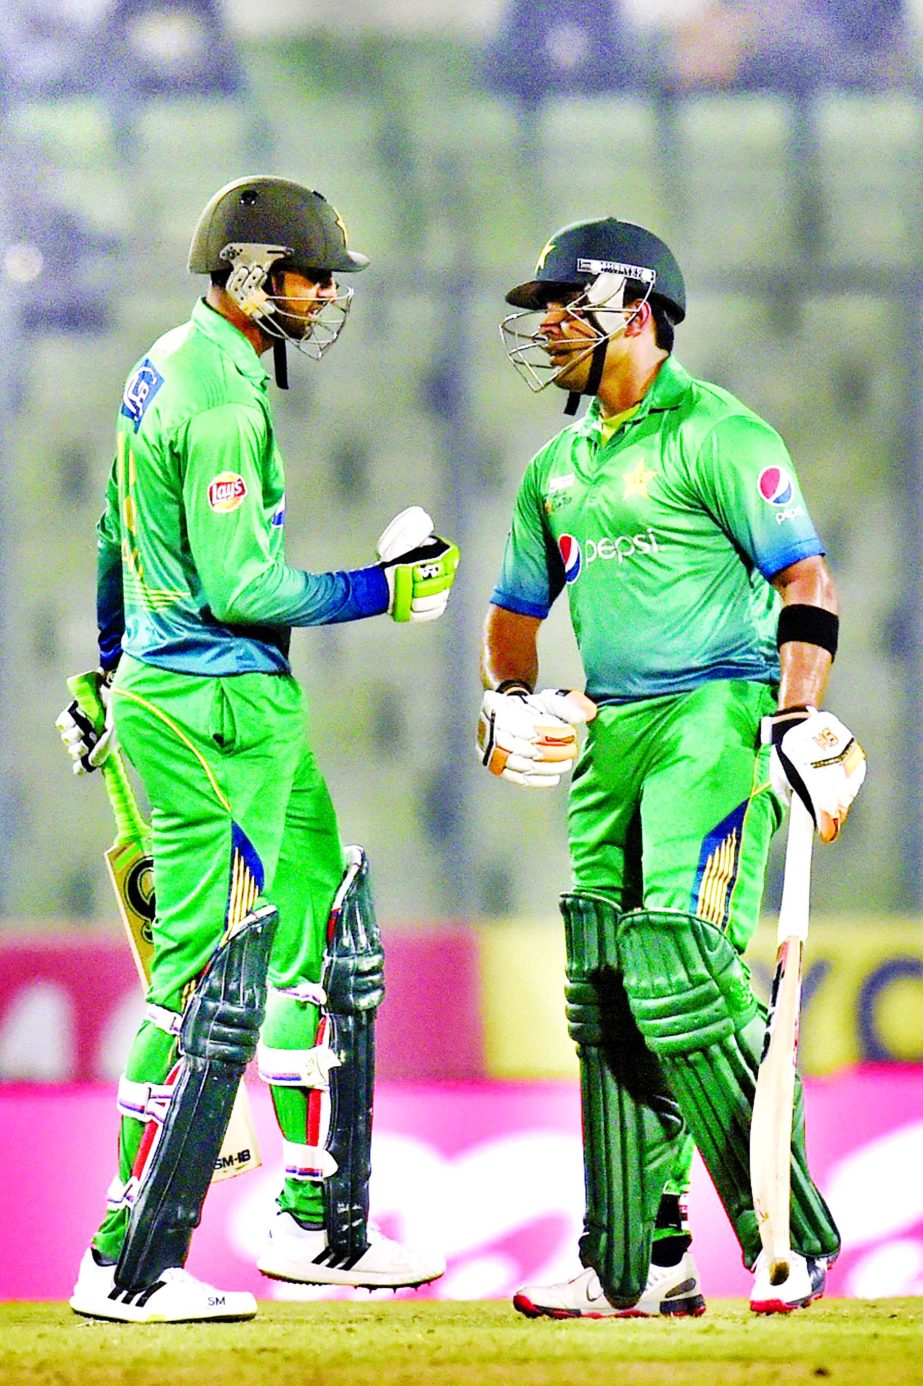 Pakistan cricketer Shoaib Malik (L) talks to his teammate Umar Akmal (R) during the Asia Cup T20 cricket tournament match between Pakistan and Sri Lanka at the Sher-e-Bangla National Cricket Stadium in Dhaka on Friday.